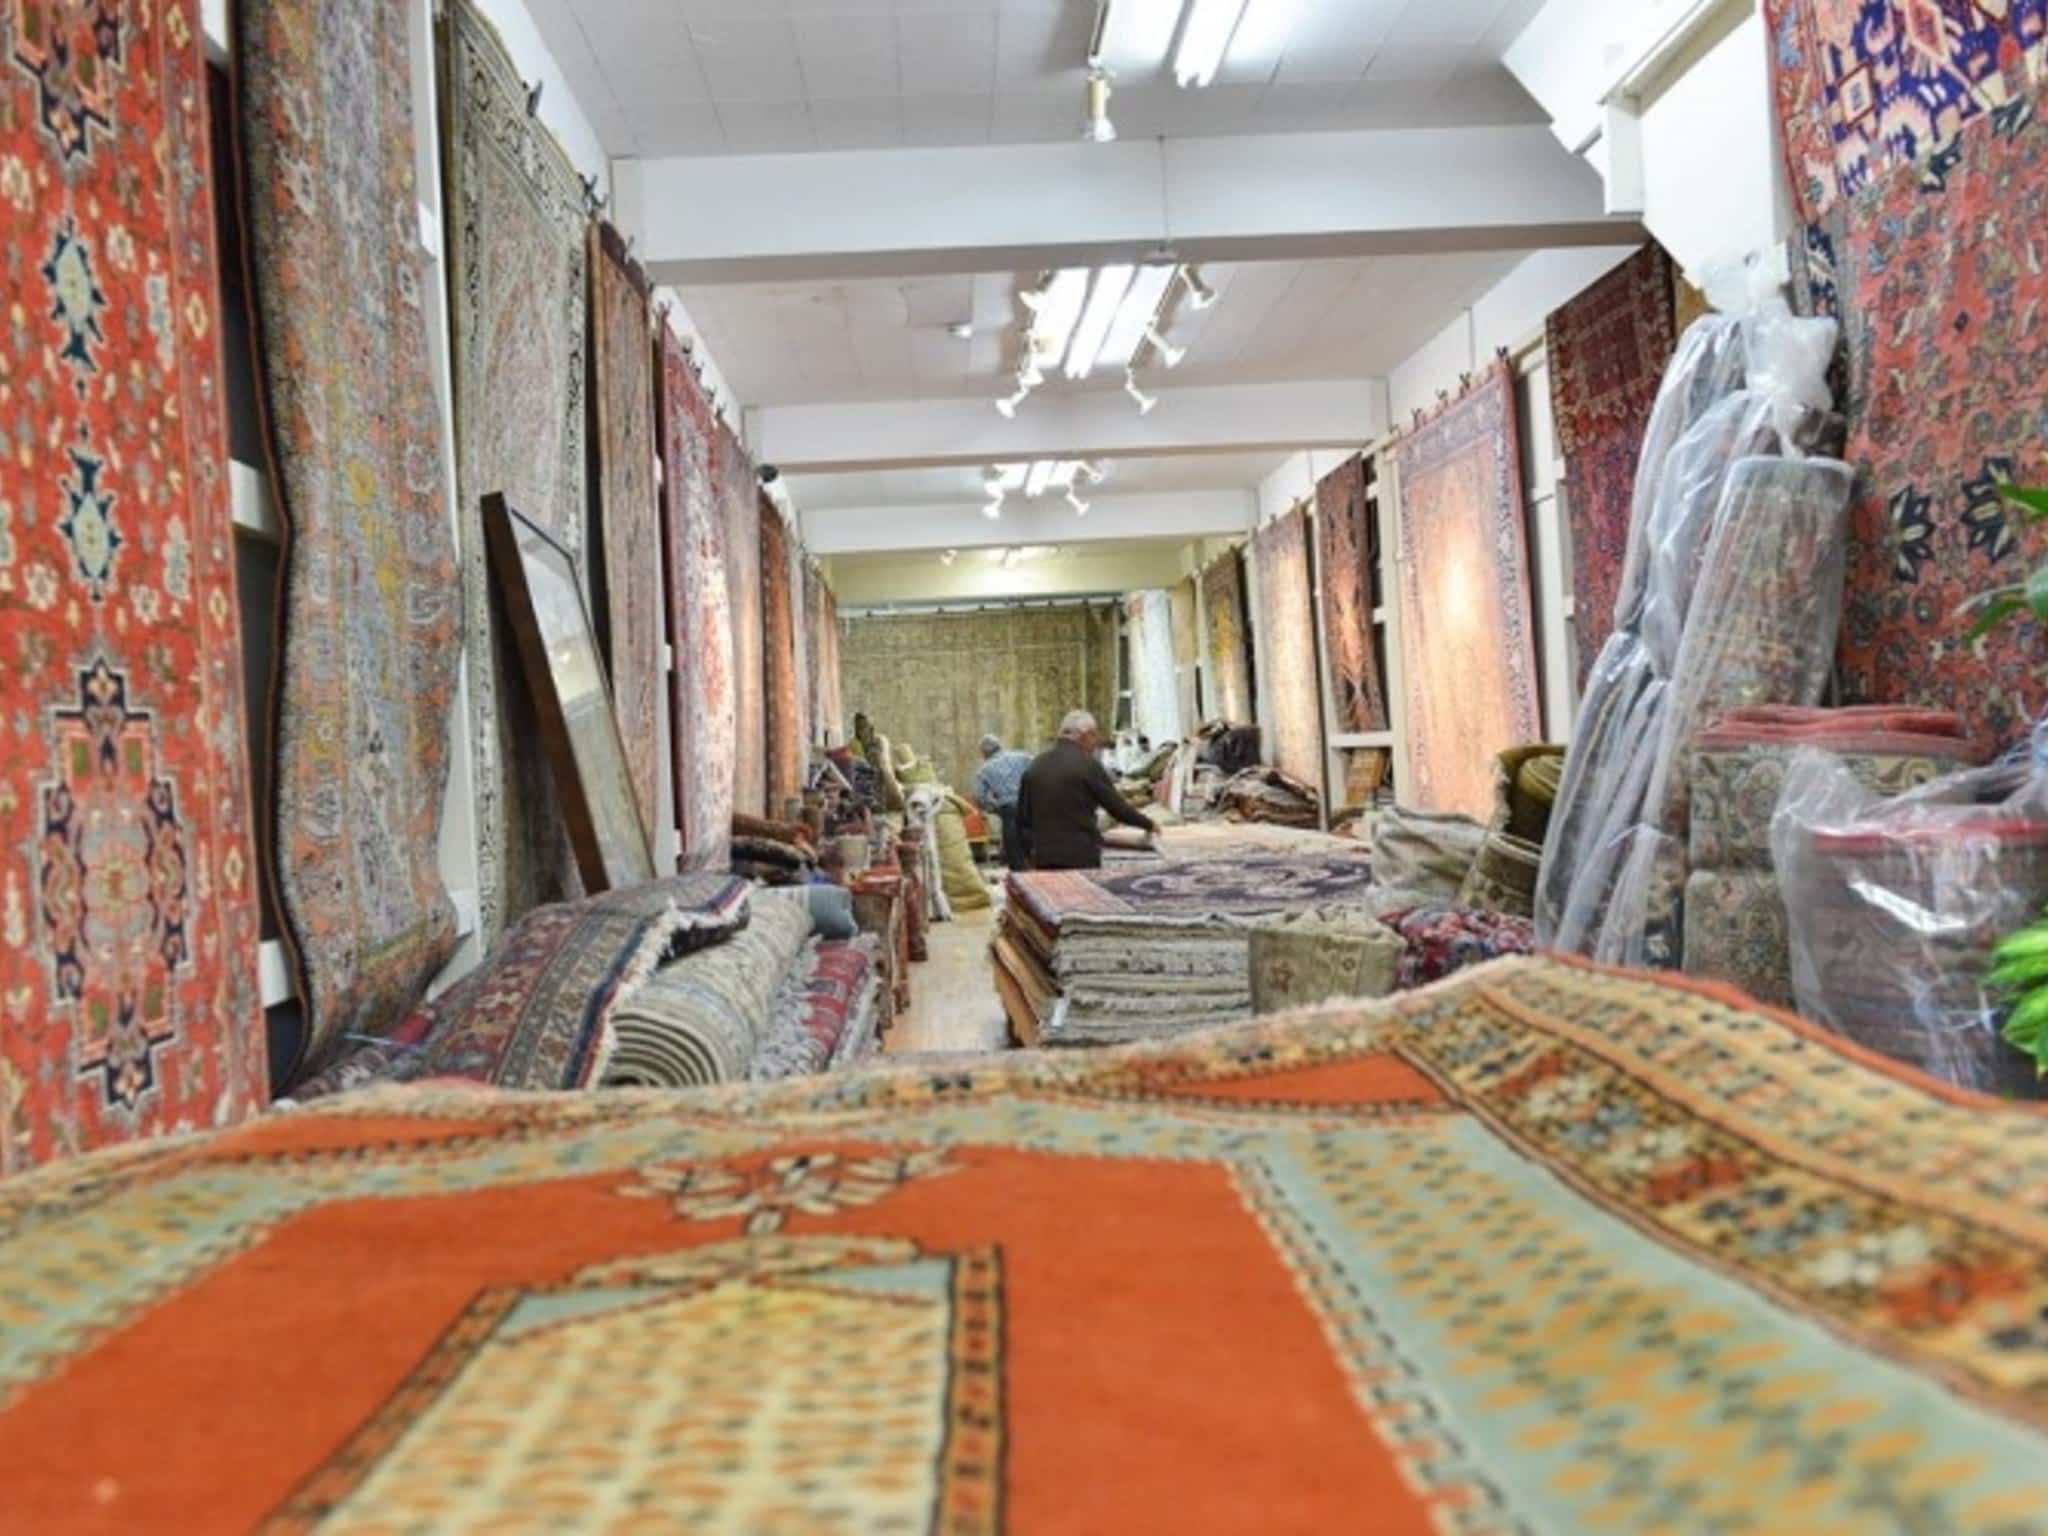 photo Royal Antique Rugs